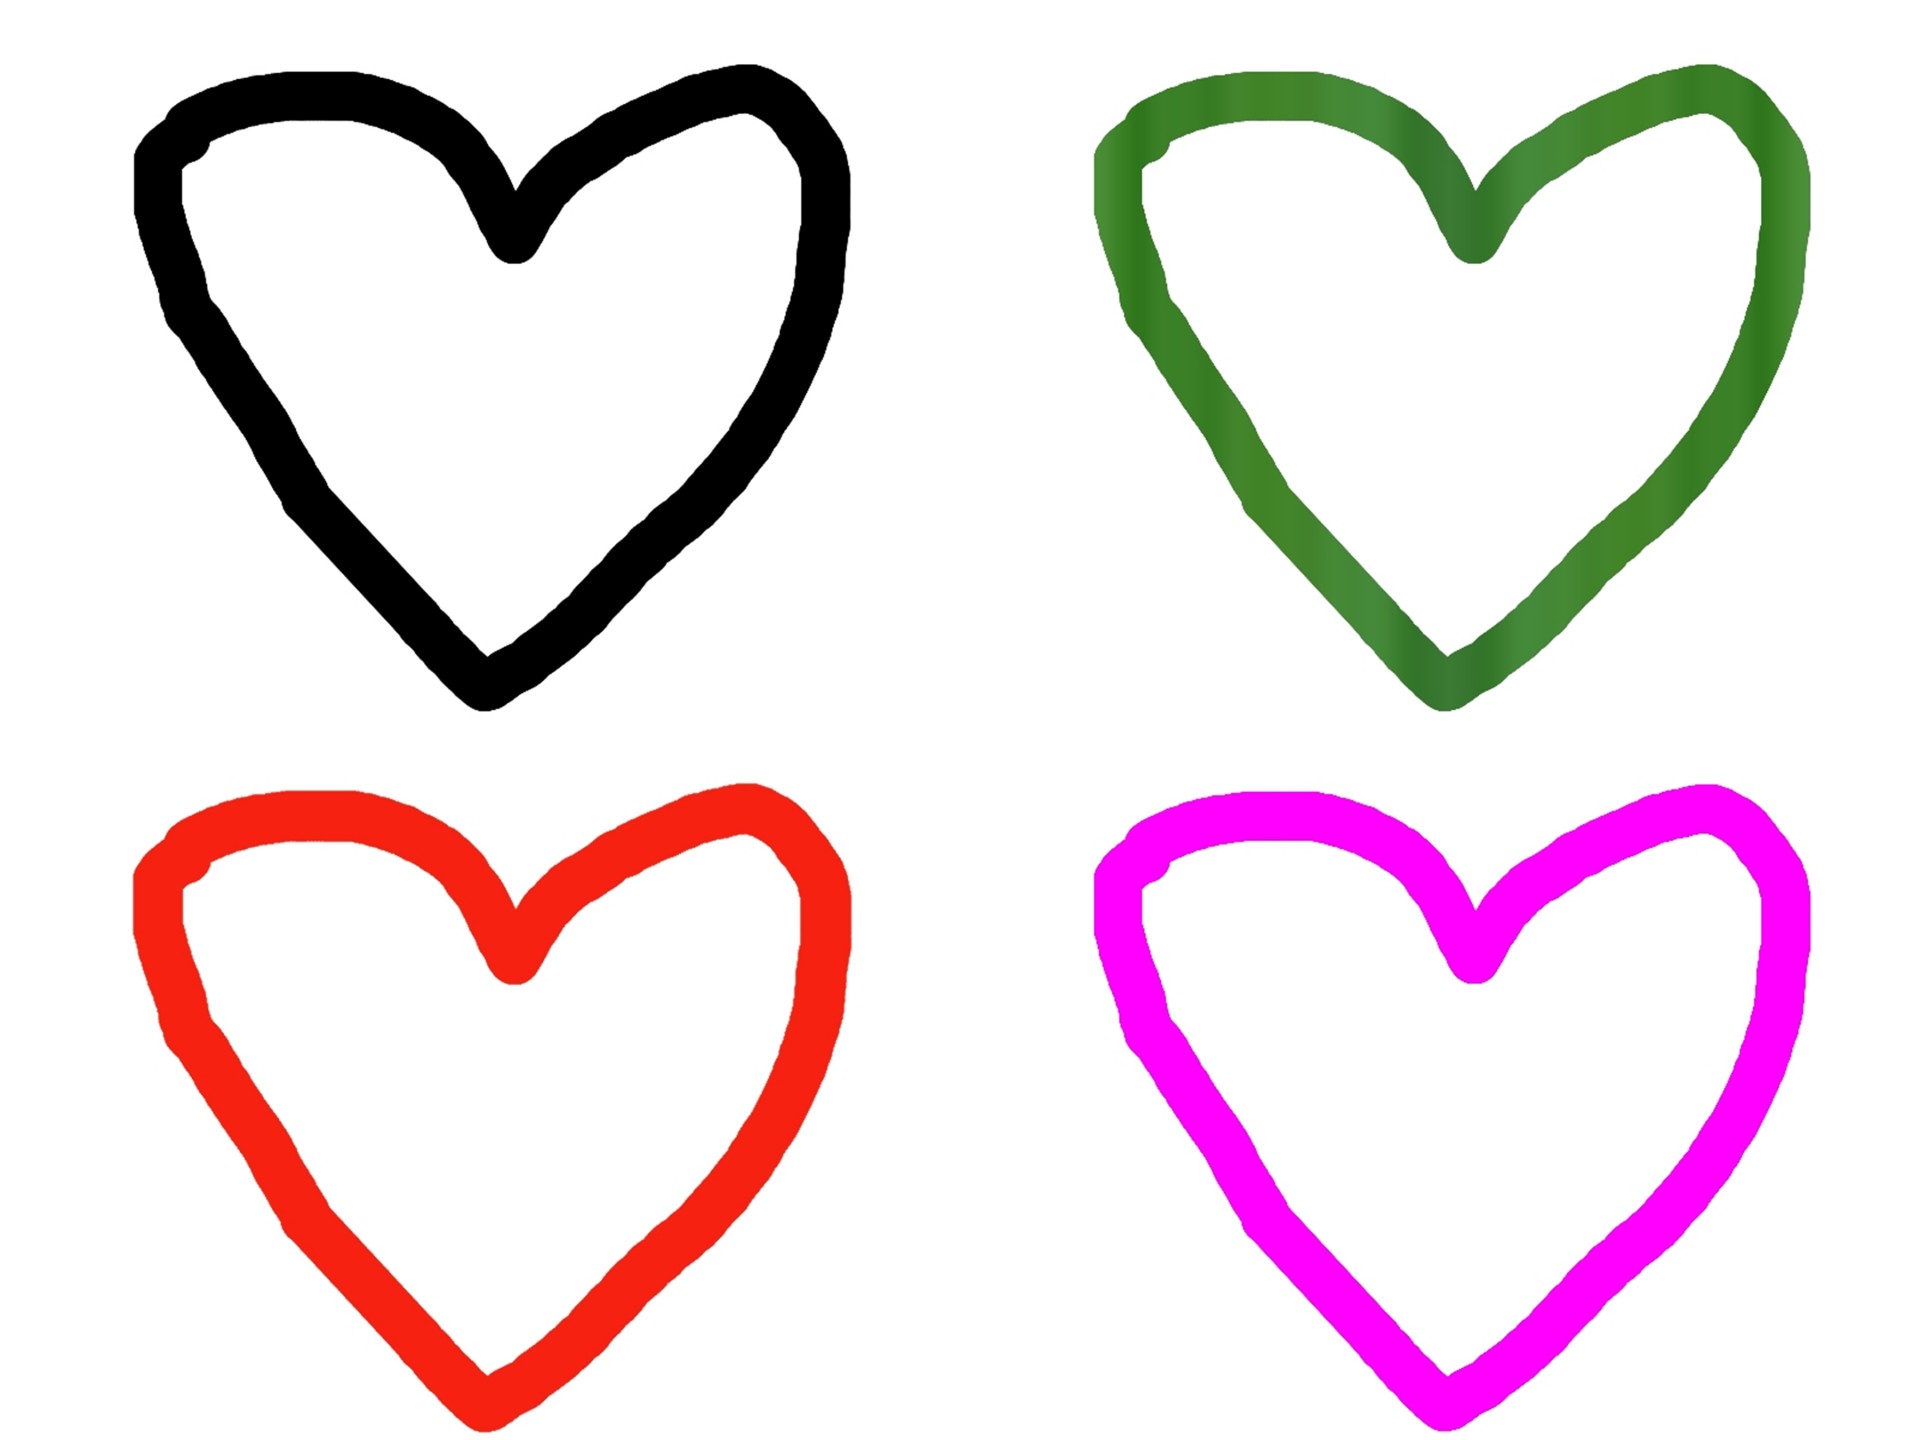 4-hearts-outline-free-stock-photo-public-domain-pictures